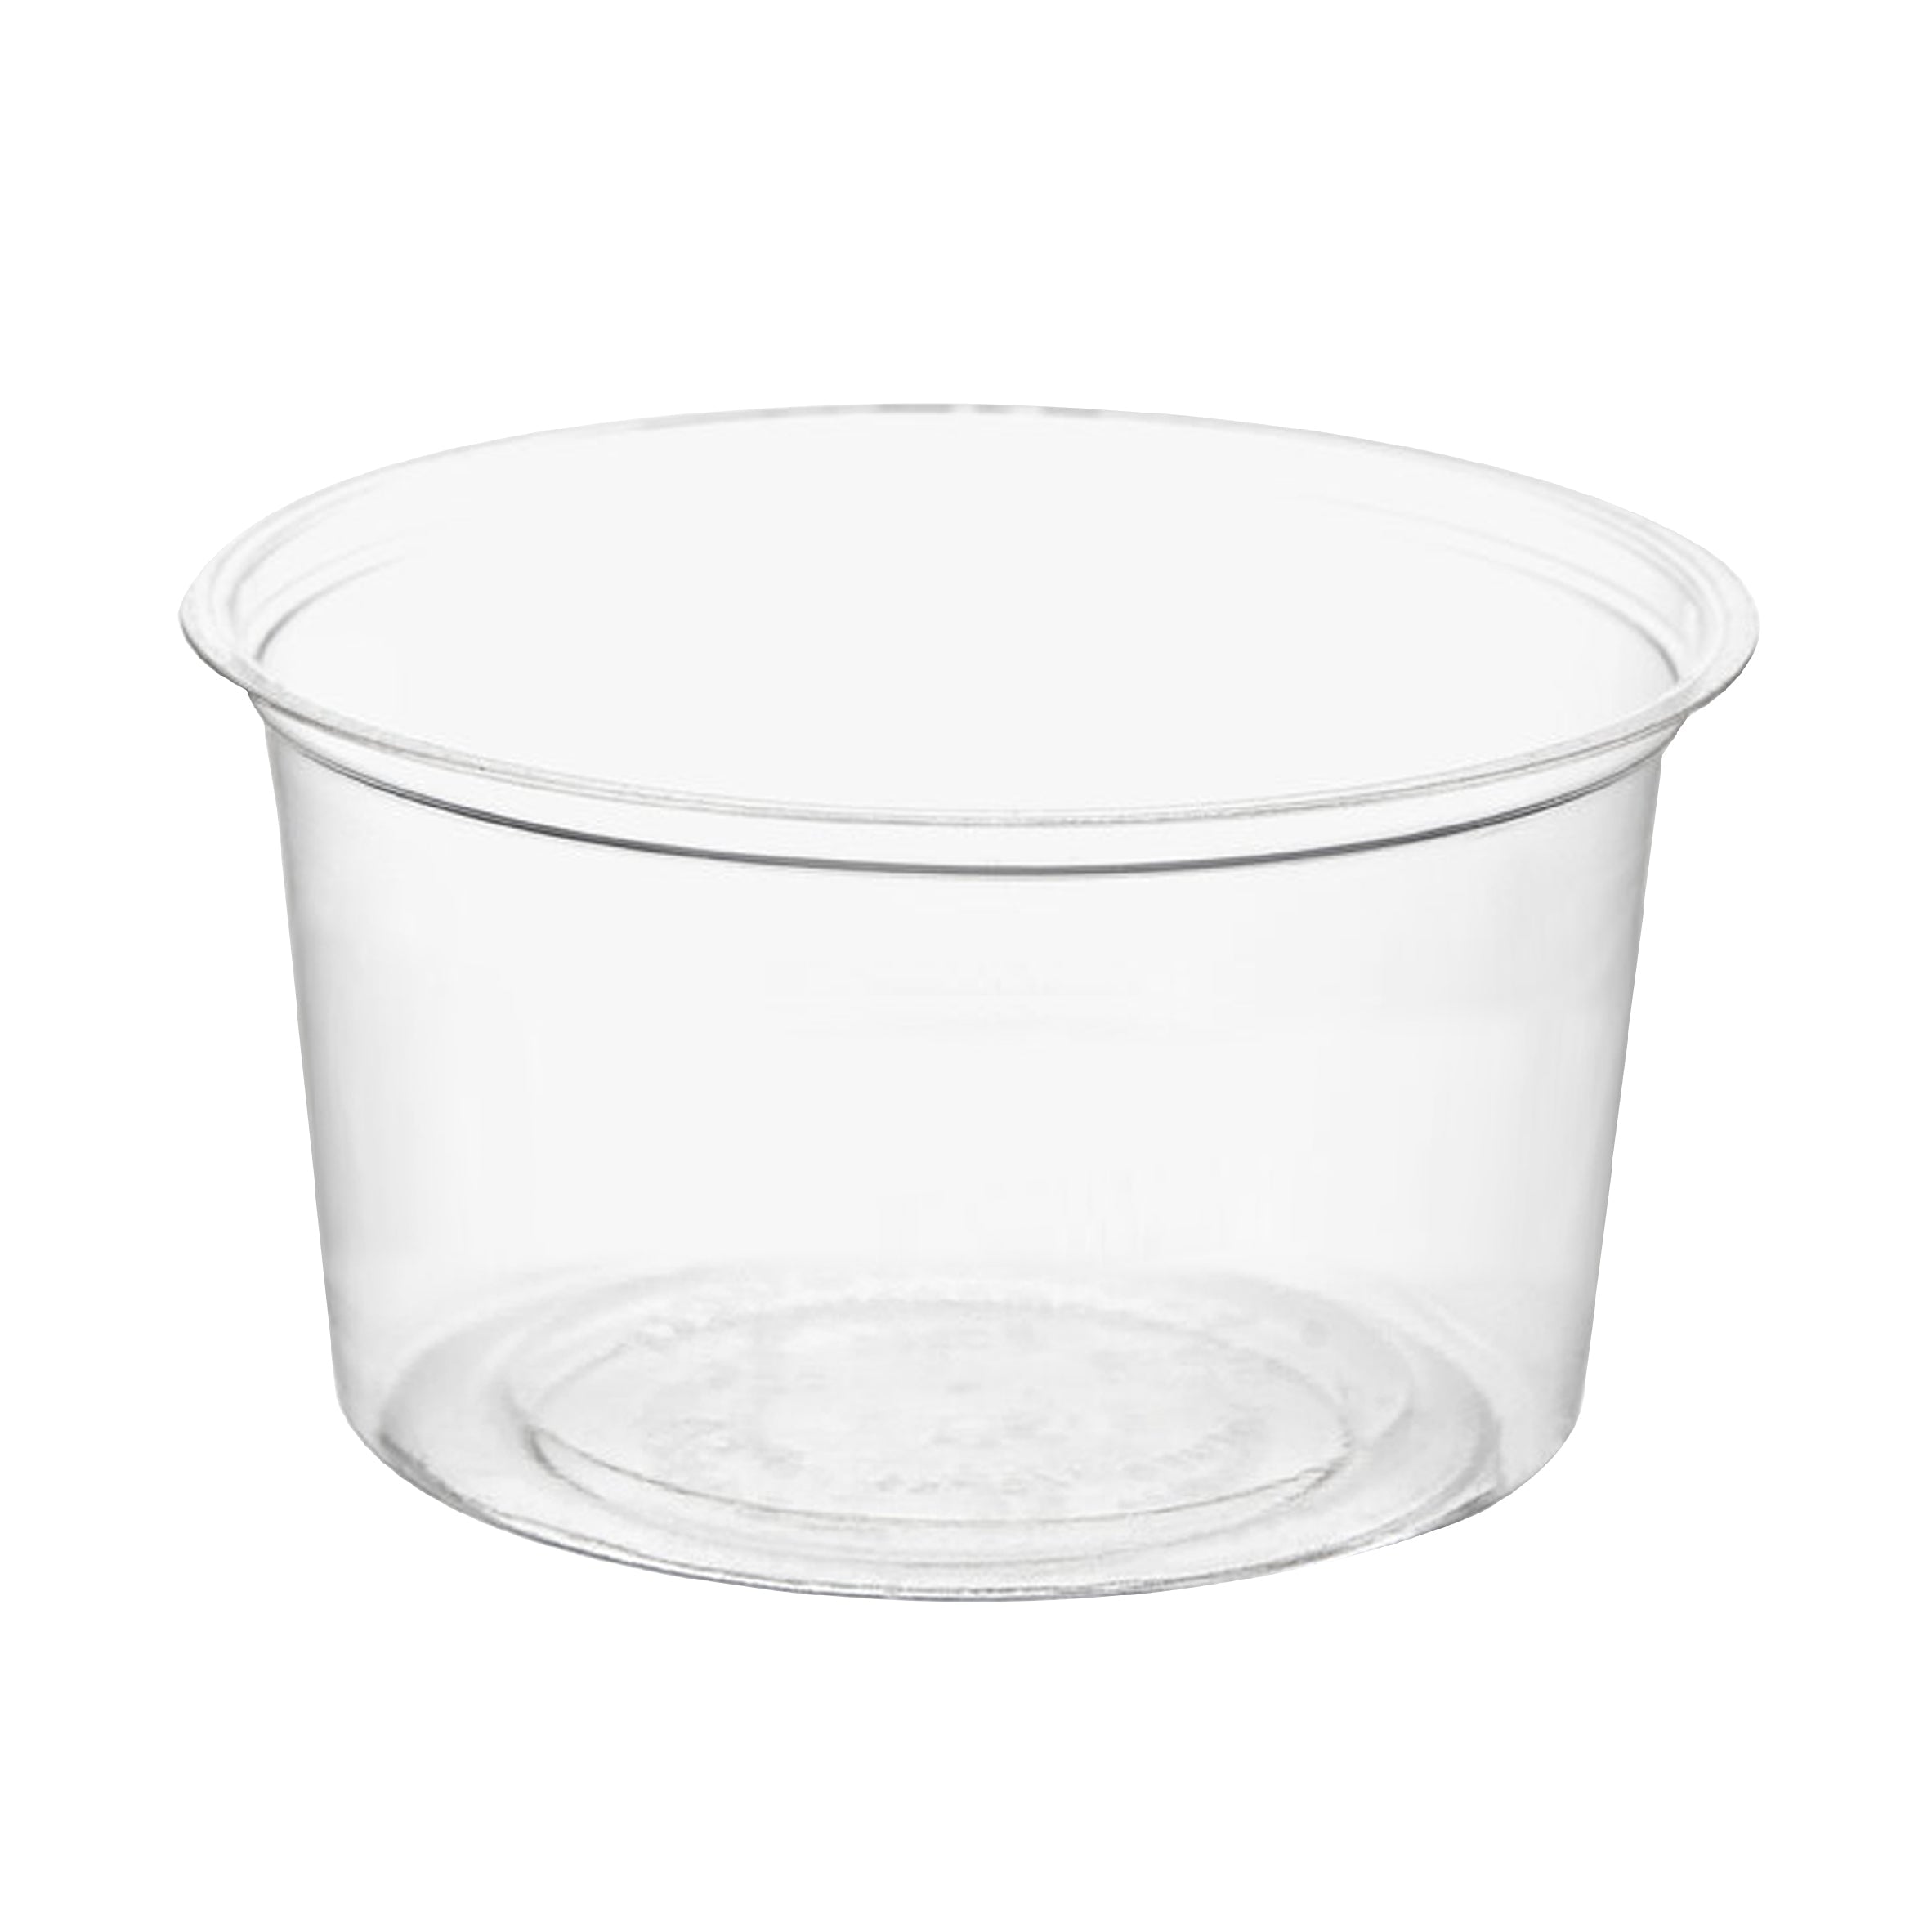 Compostable 4 oz Clear Portion Cups